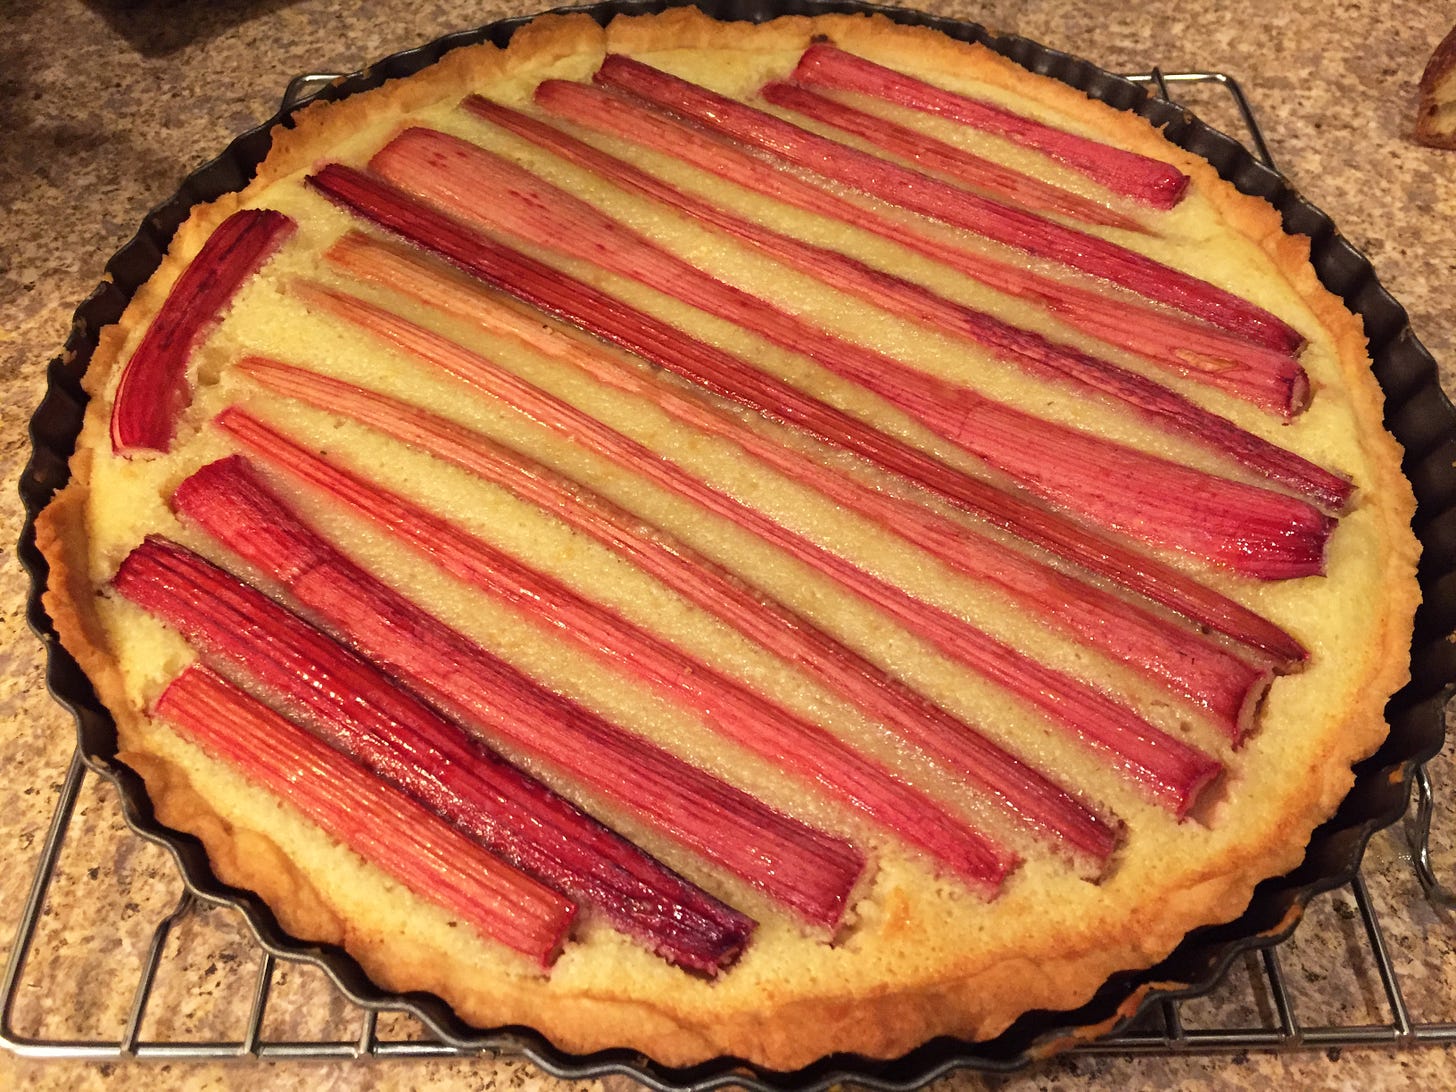 On a cooling rack is a tart pan containing a frangipane tart with browned edges, and stalks of cooked rhubarb lain across the top.